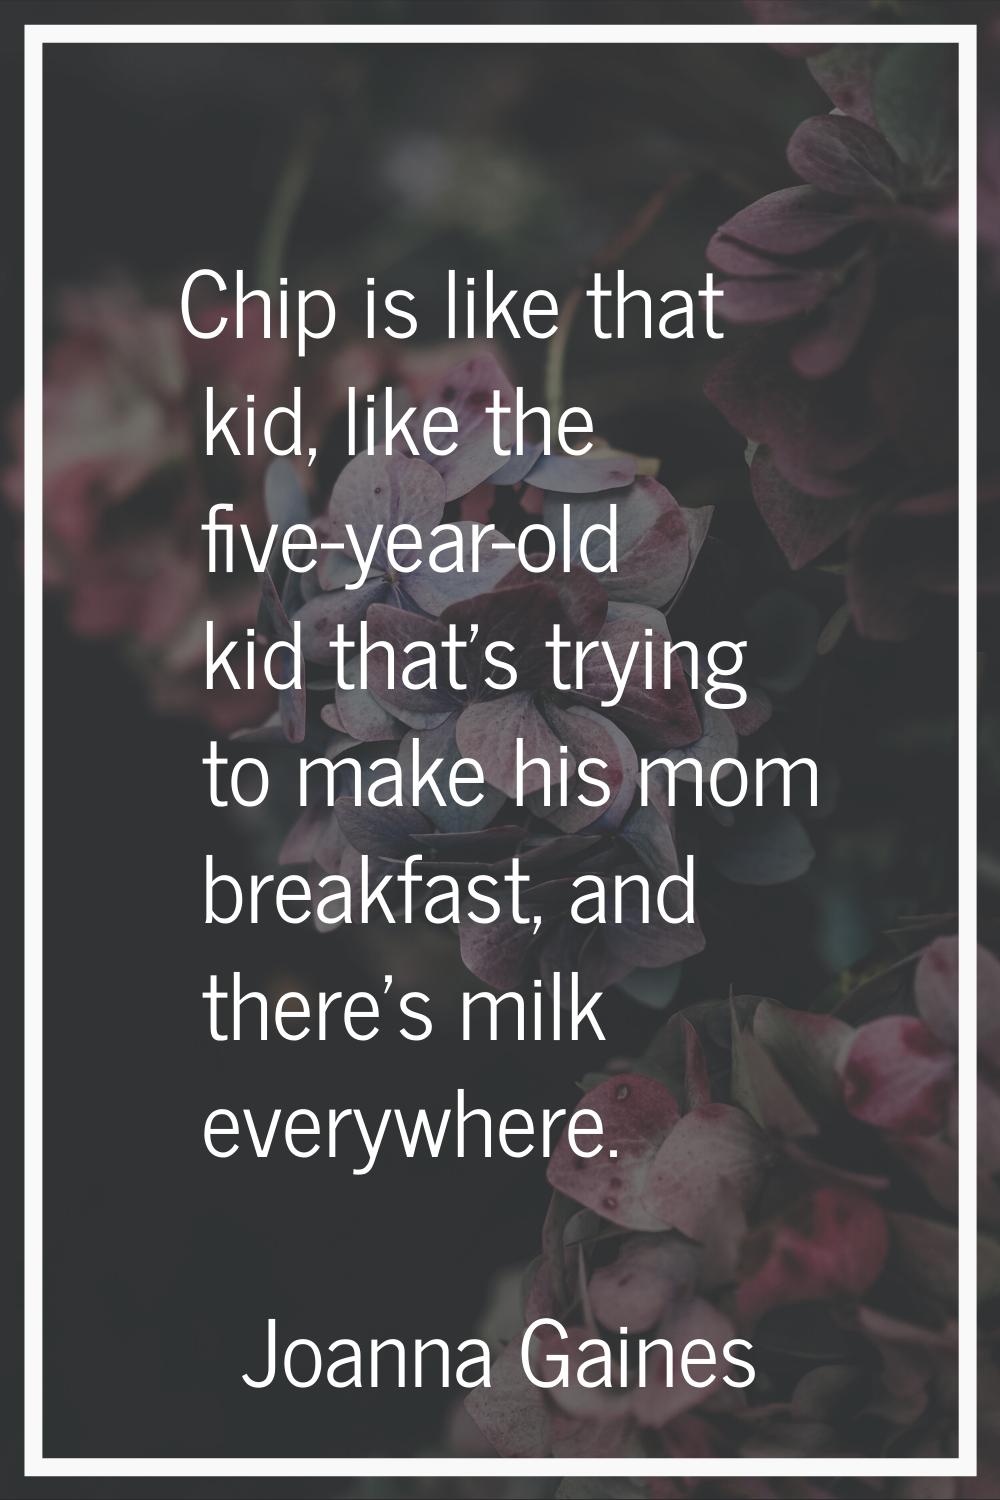 Chip is like that kid, like the five-year-old kid that's trying to make his mom breakfast, and ther